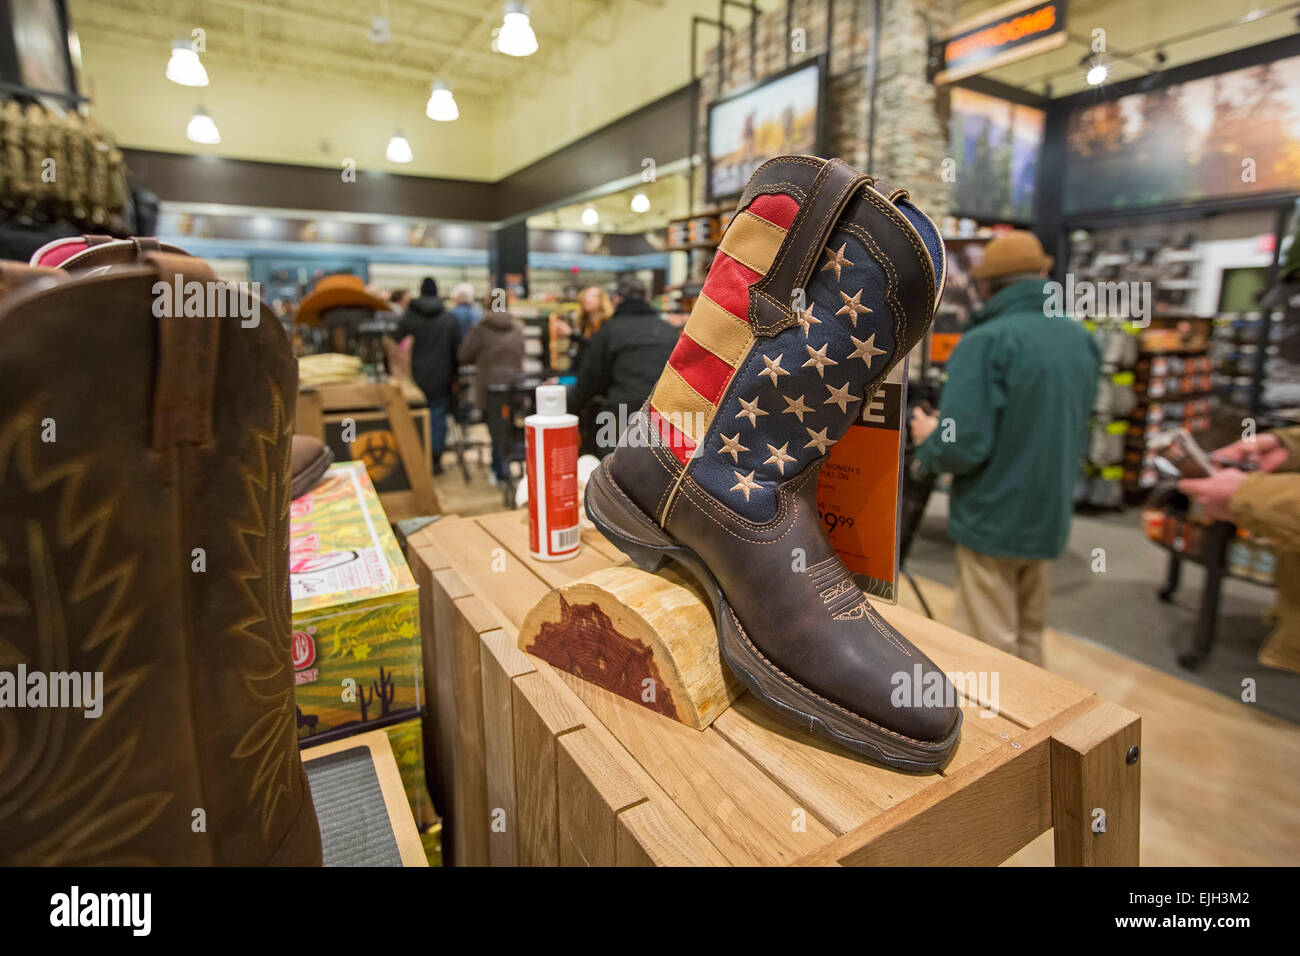 Troy, Michigan - Patriotic boots on sale at the Field & Steam outdoors store. Stock Photo